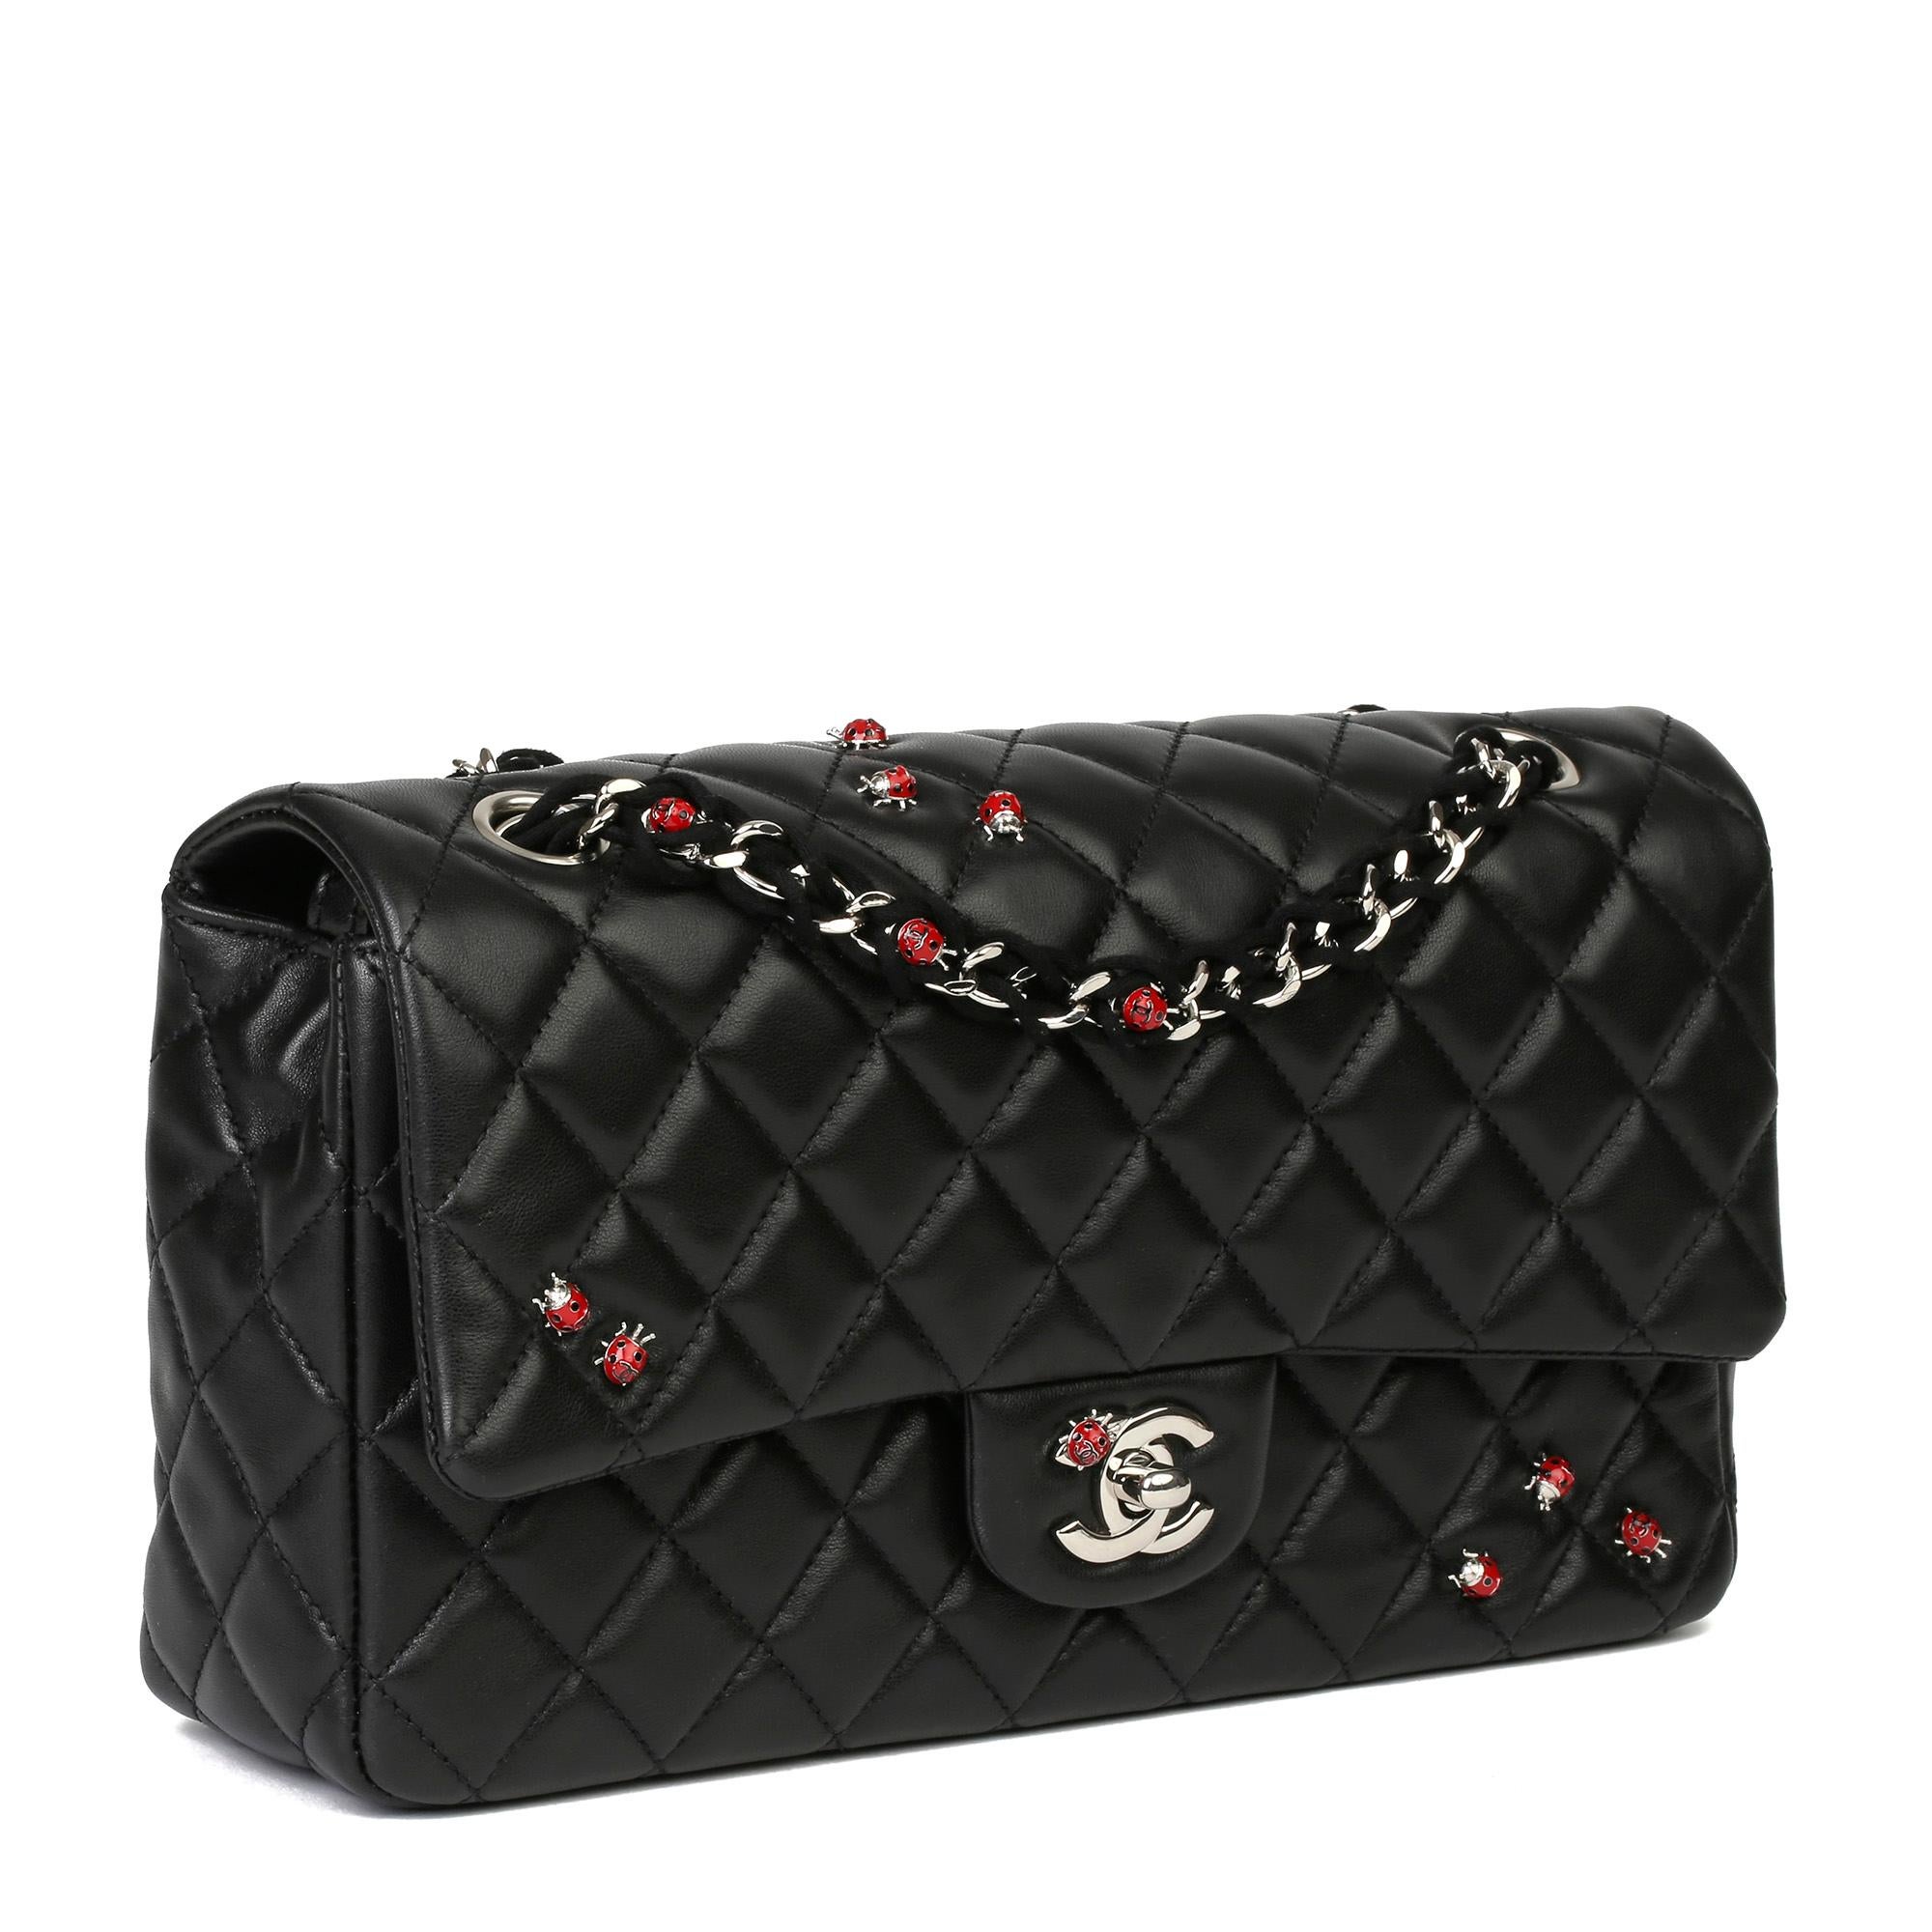 CHANEL
Black Quilted Lambskin Lady Bug Medium Classic Single Flap Bag

Xupes Reference: CB326
Serial Number: 14881705
Age (Circa): 2011
Accompanied By:  Authenticity Card, Care Booklet, Protective Felt
Authenticity Details: Serial Sticker,